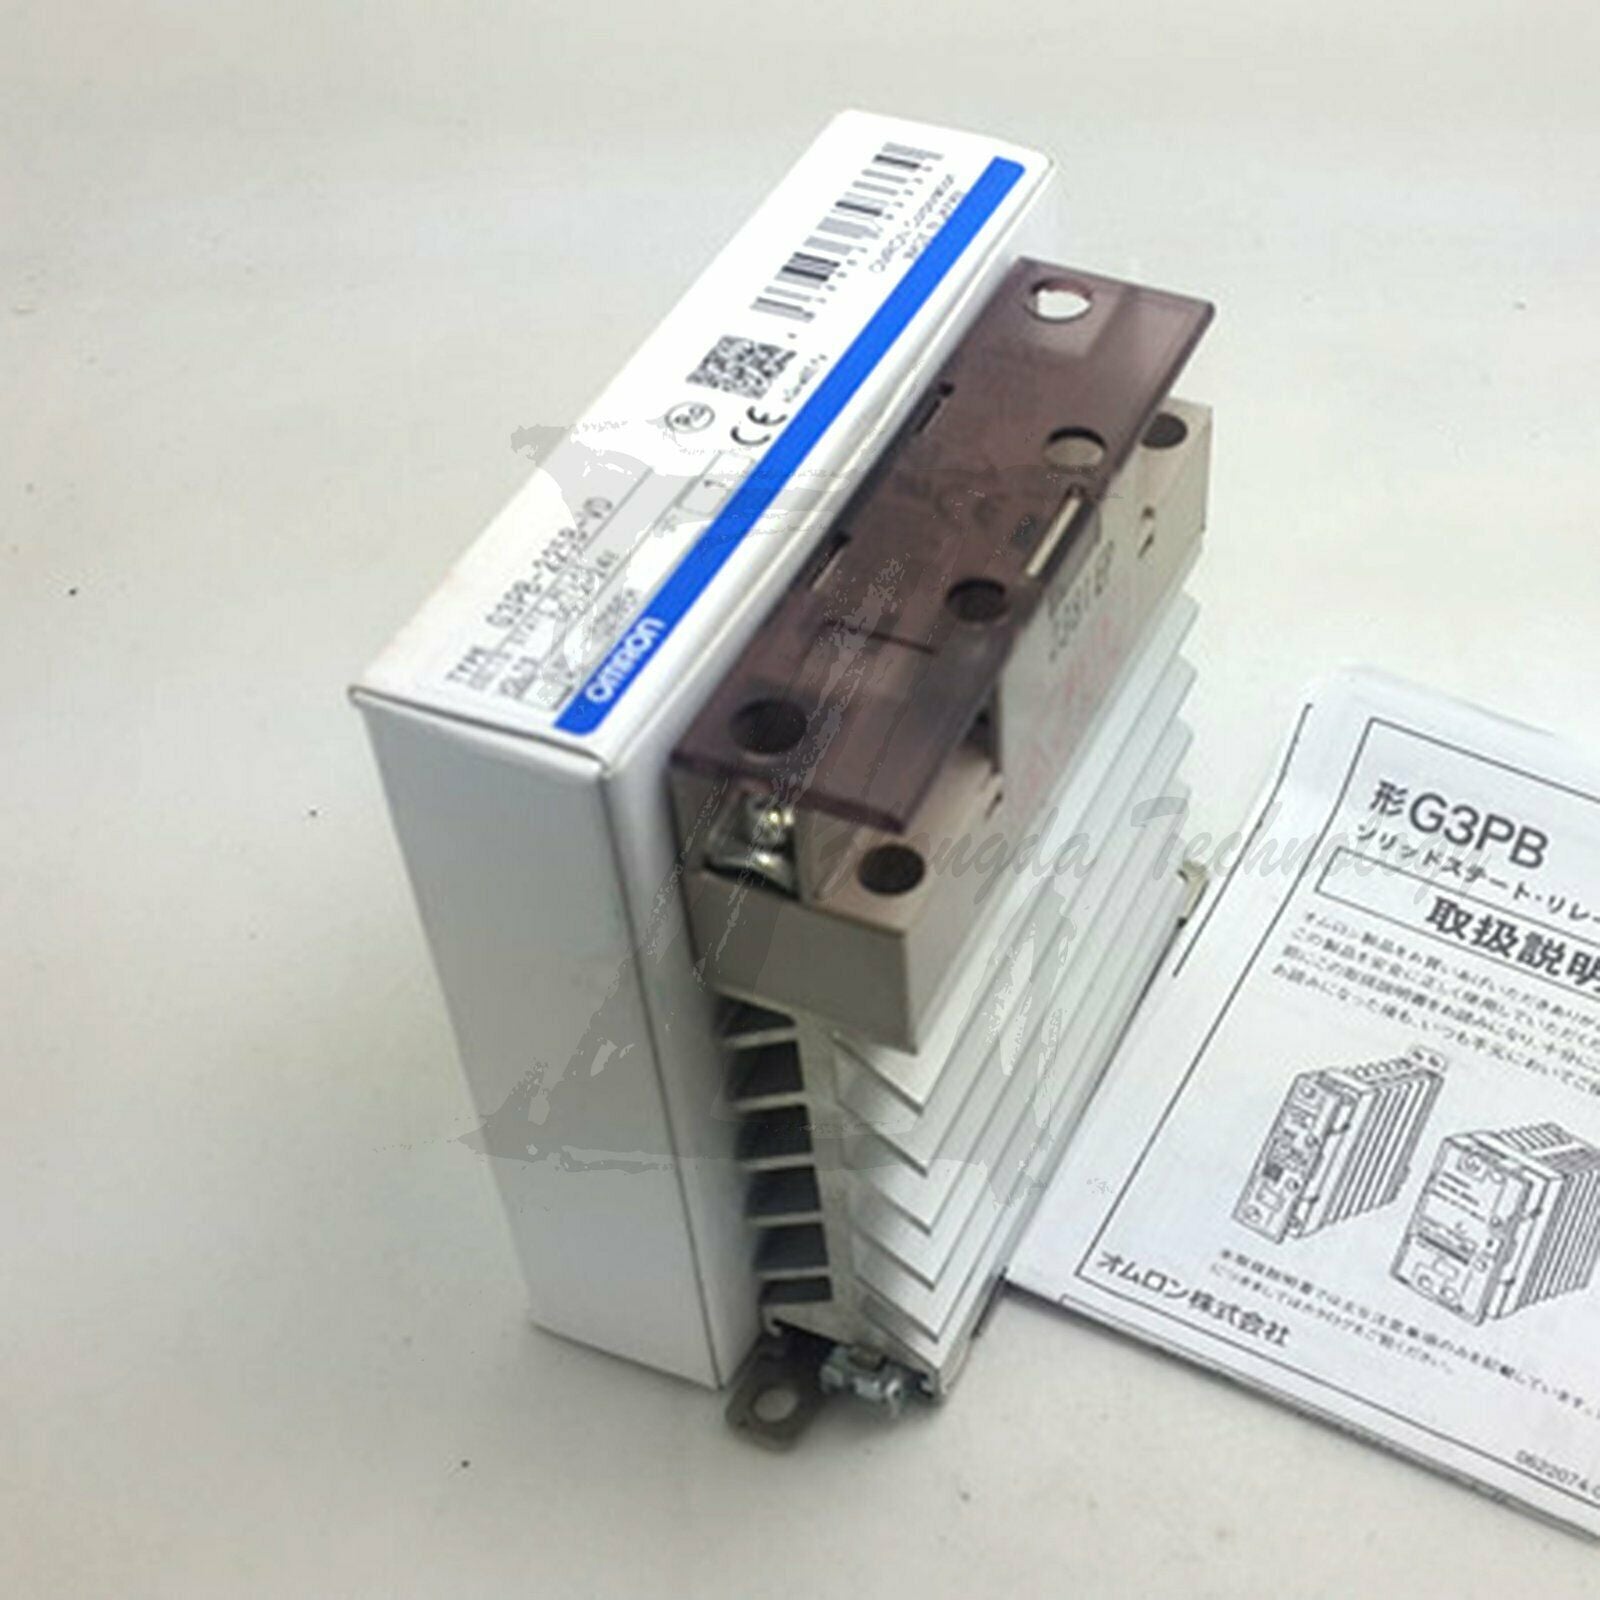 NEW OMRON Solid State Relay G3PB-225B-VD 25ADC12-24V